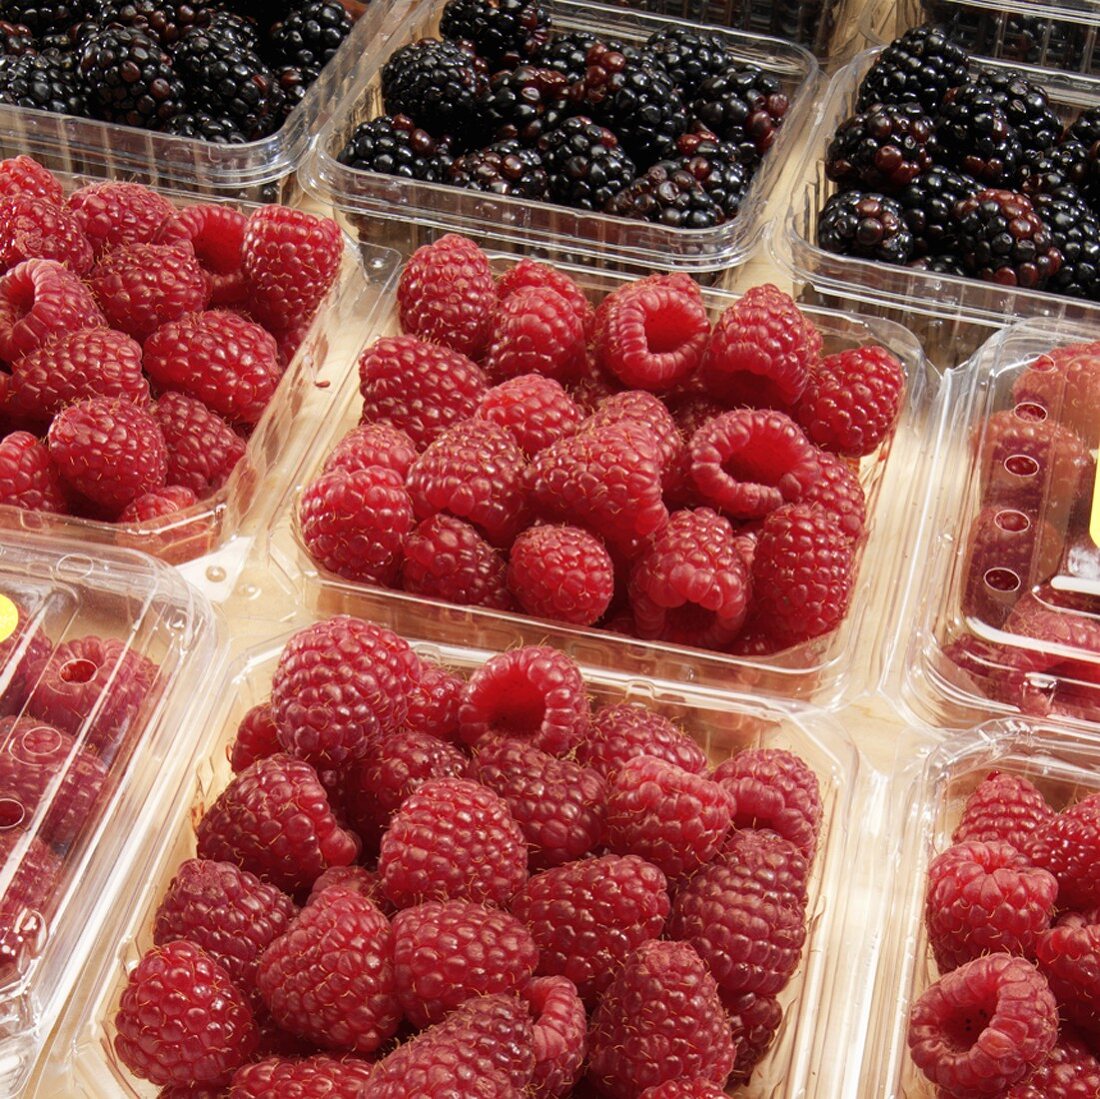 Red Raspberries and Blackberries in Plastic Containers